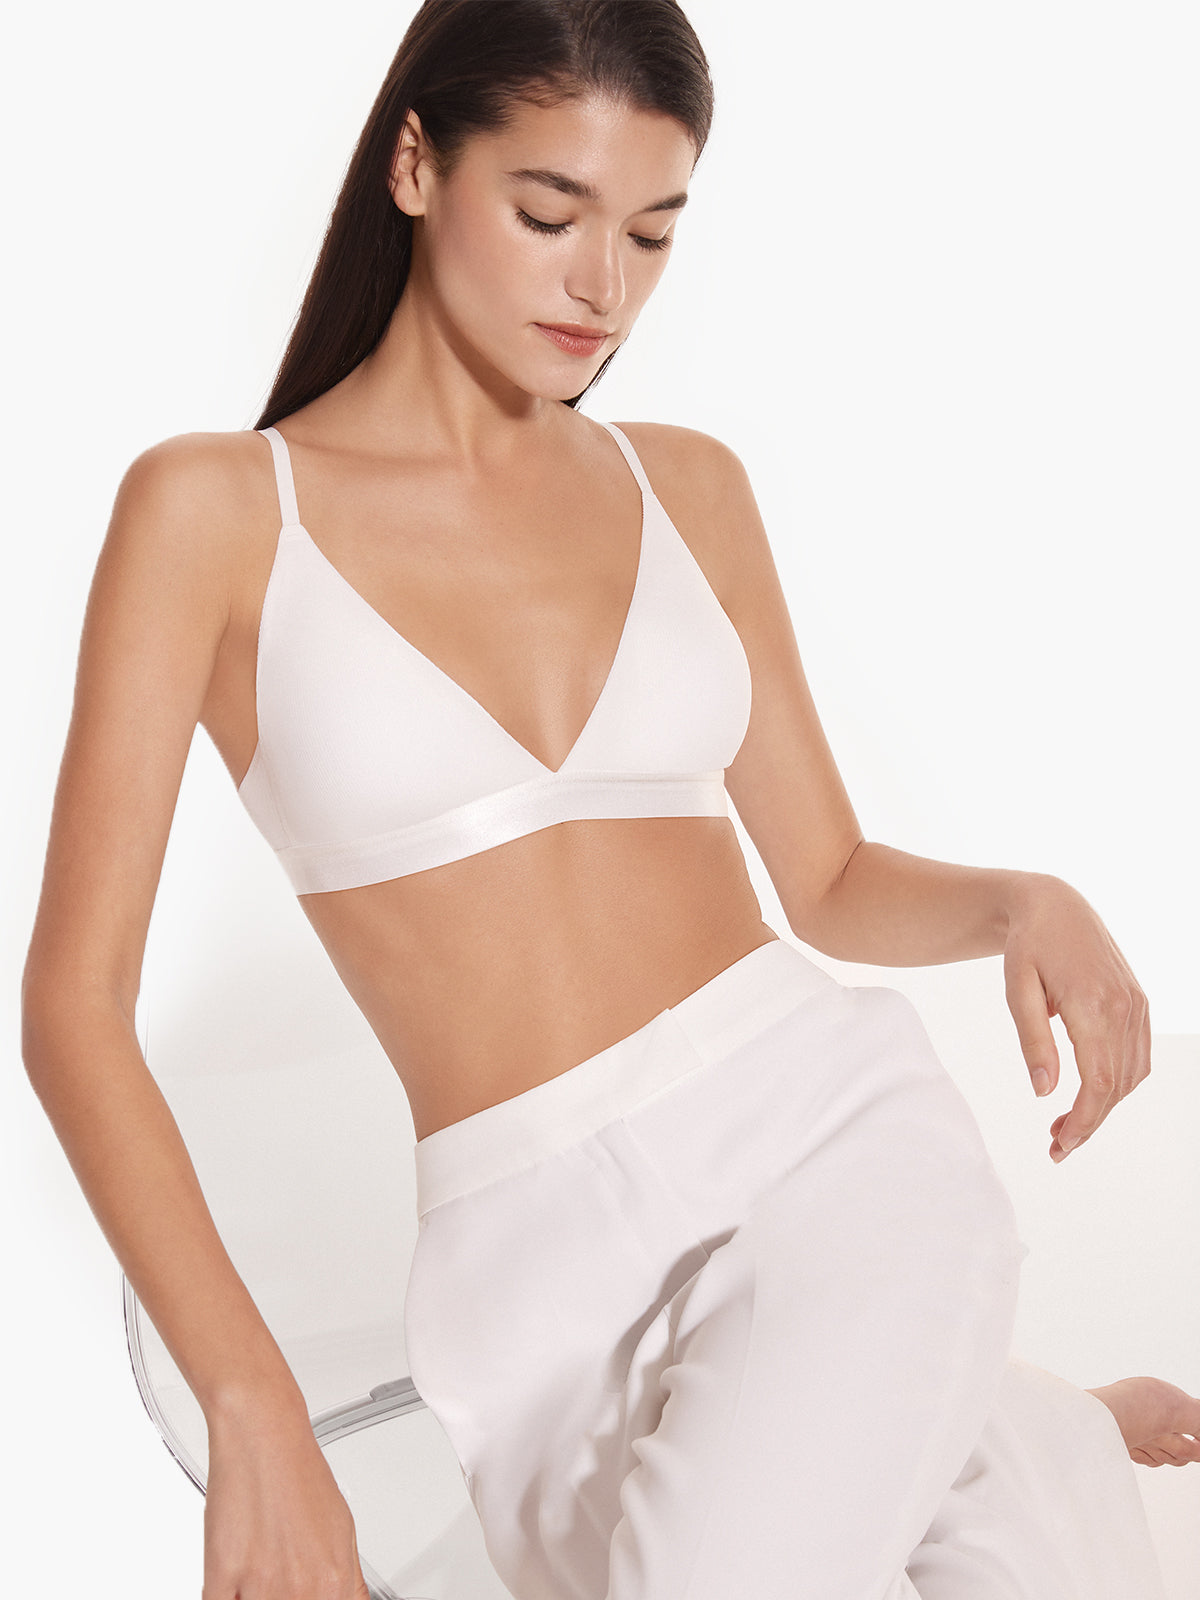 Breeze In Cooling Triangle Cup Wireless Bra